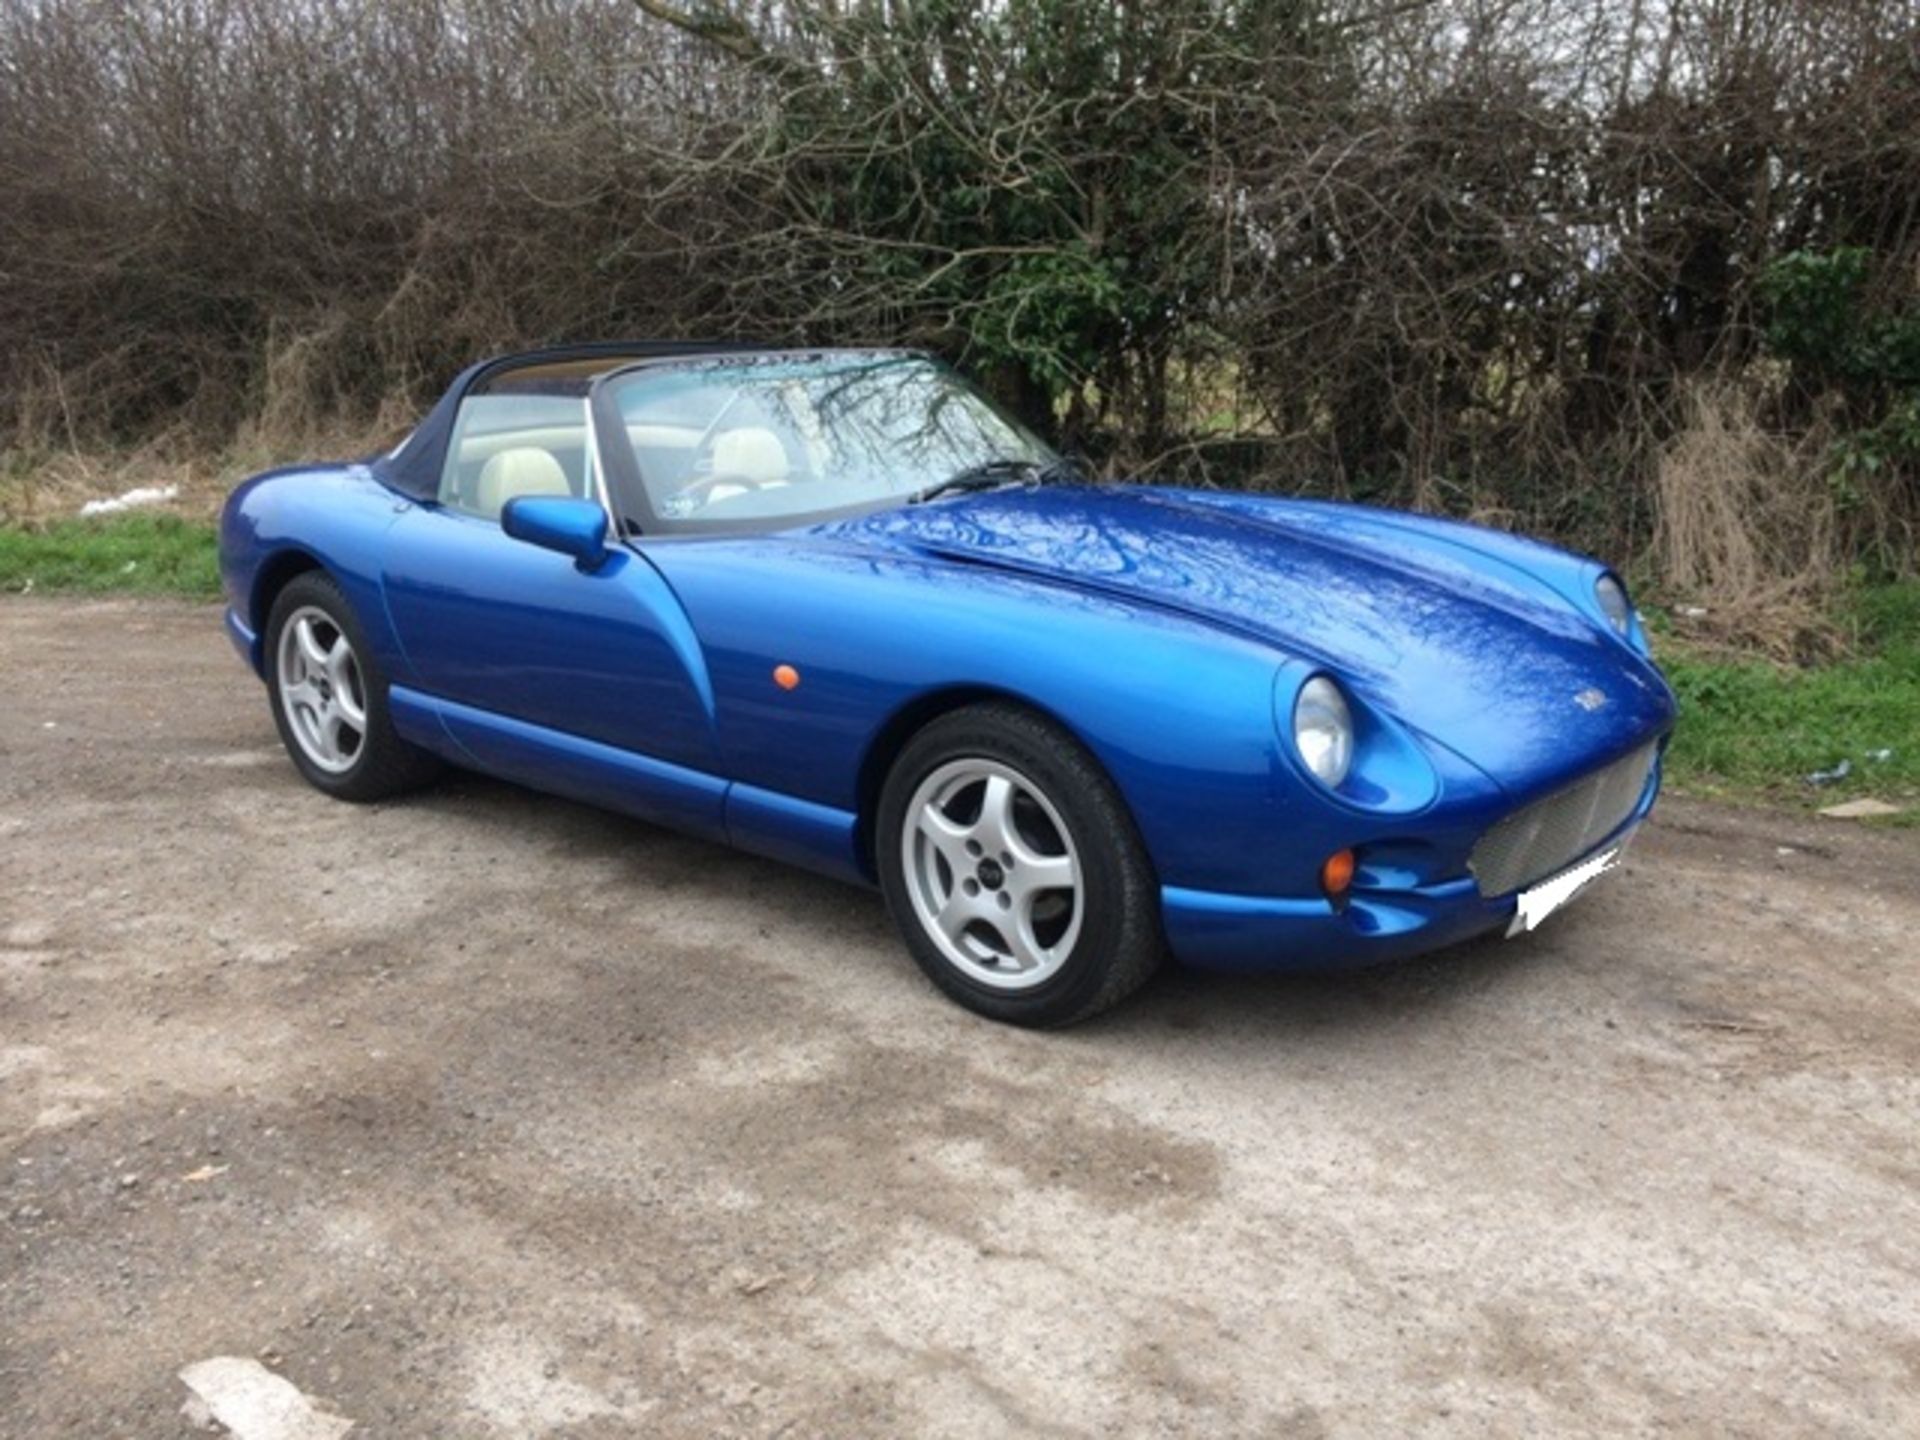 TVR Chimaera 1995 - Now confirmed with us is this very very nice 1995 TVR Chimaera 4.0L and is